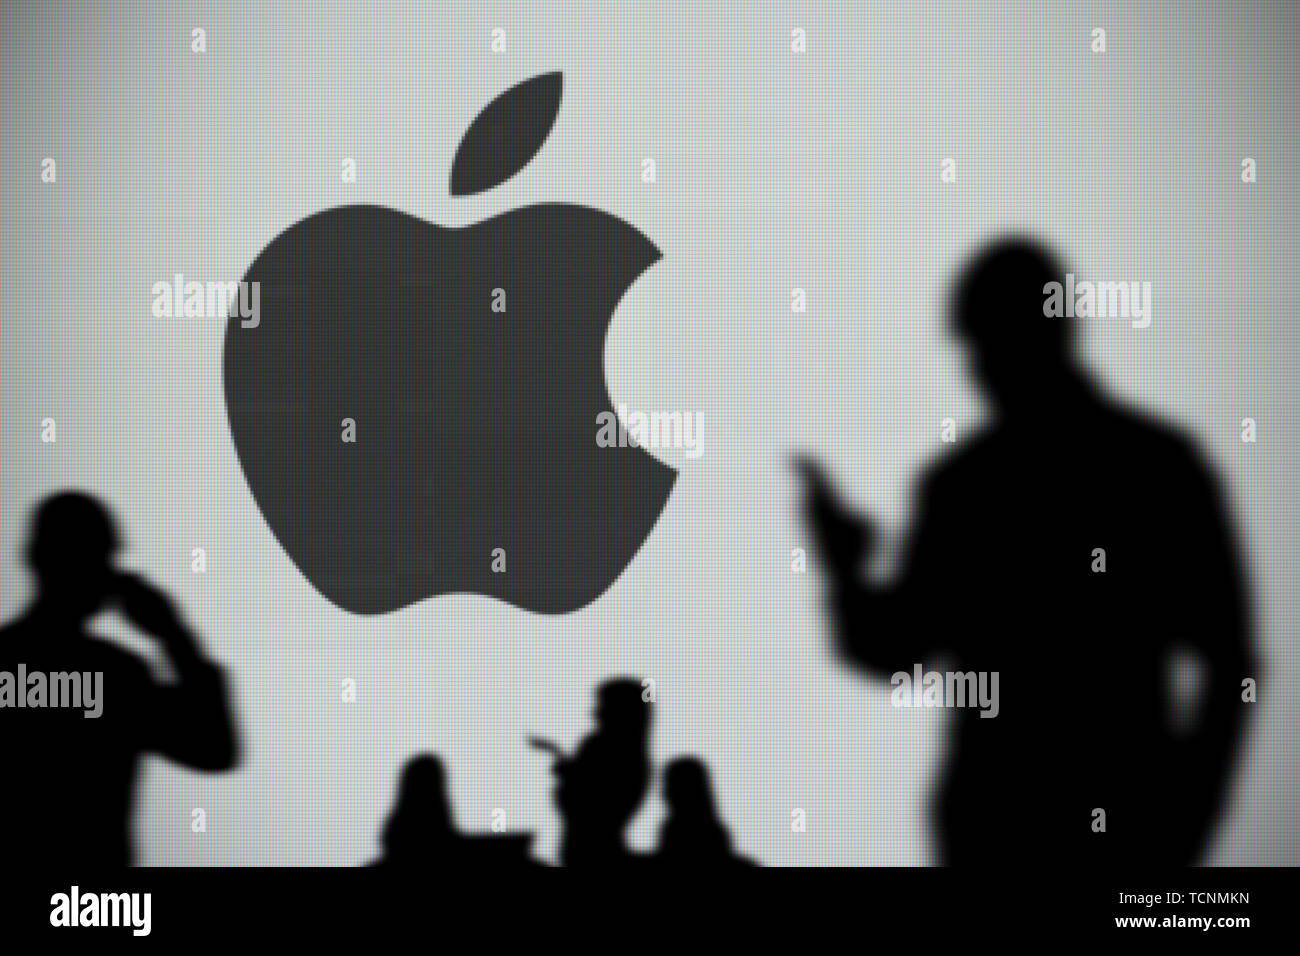 The Apple logo is seen on an LED screen in the background while a silhouetted person uses a smartphone in the foreground (Editorial use only) Stock Photo